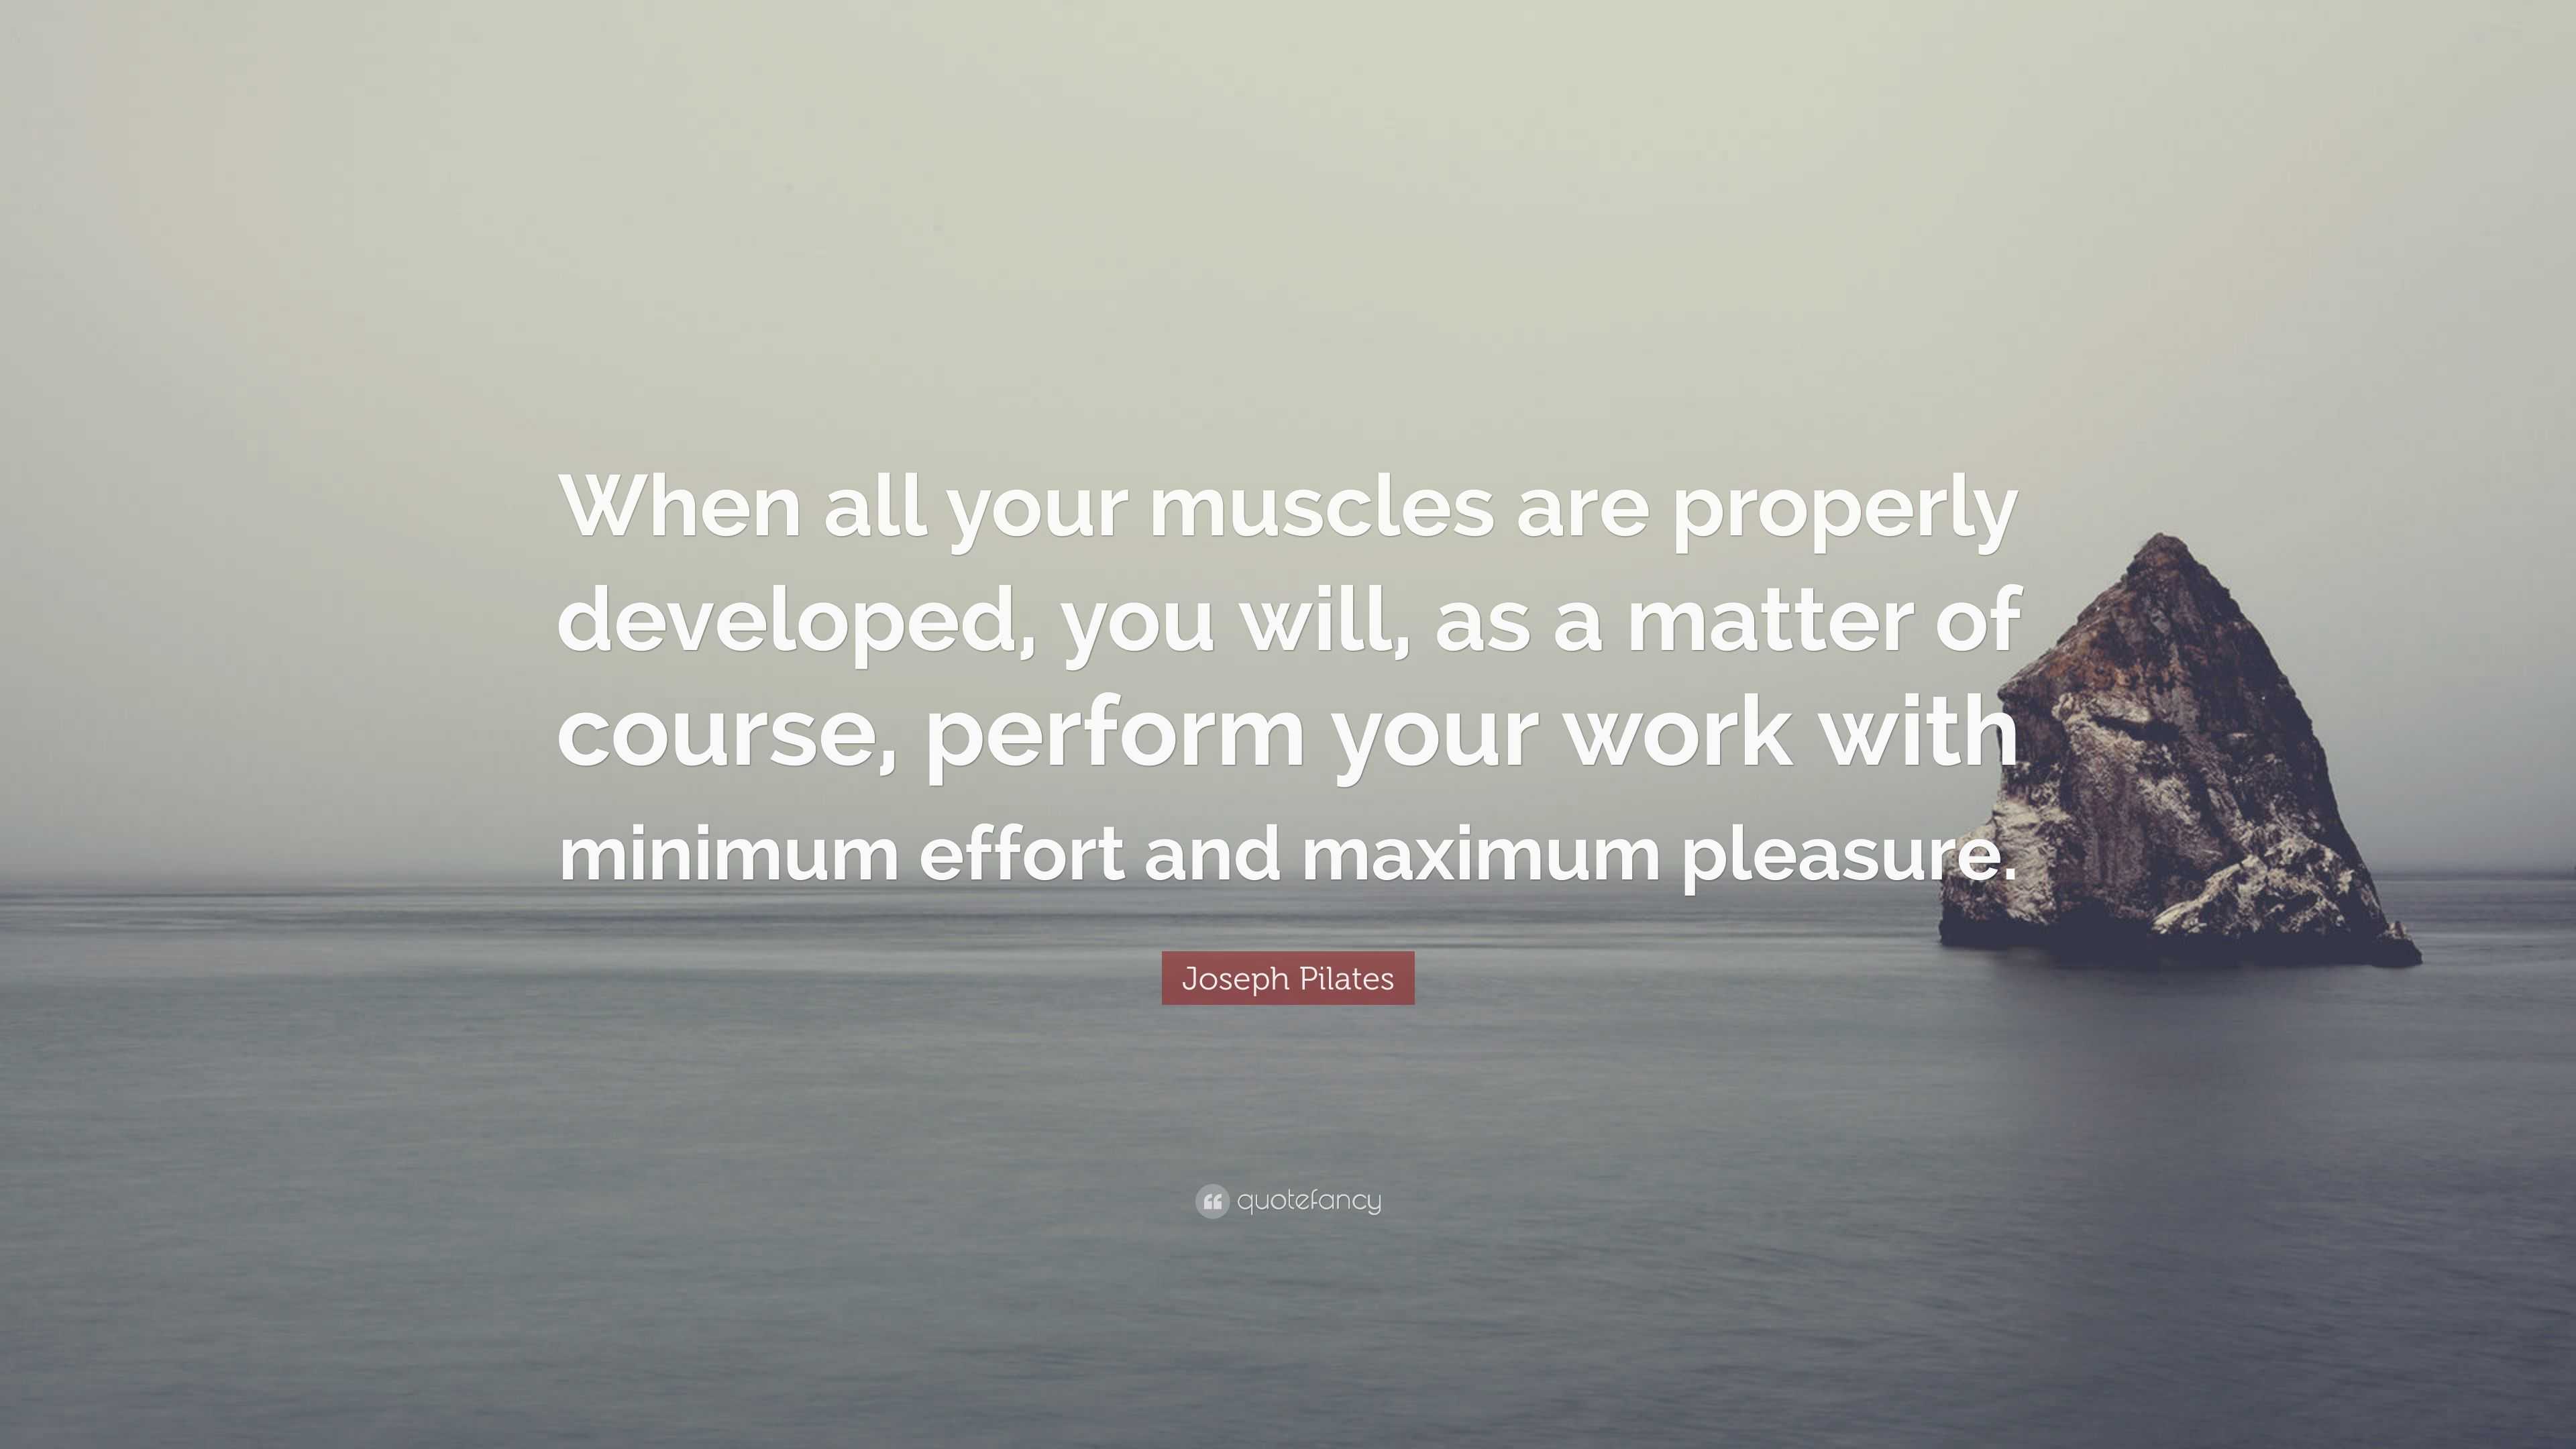 When all your muscles are properly developed, you will, as